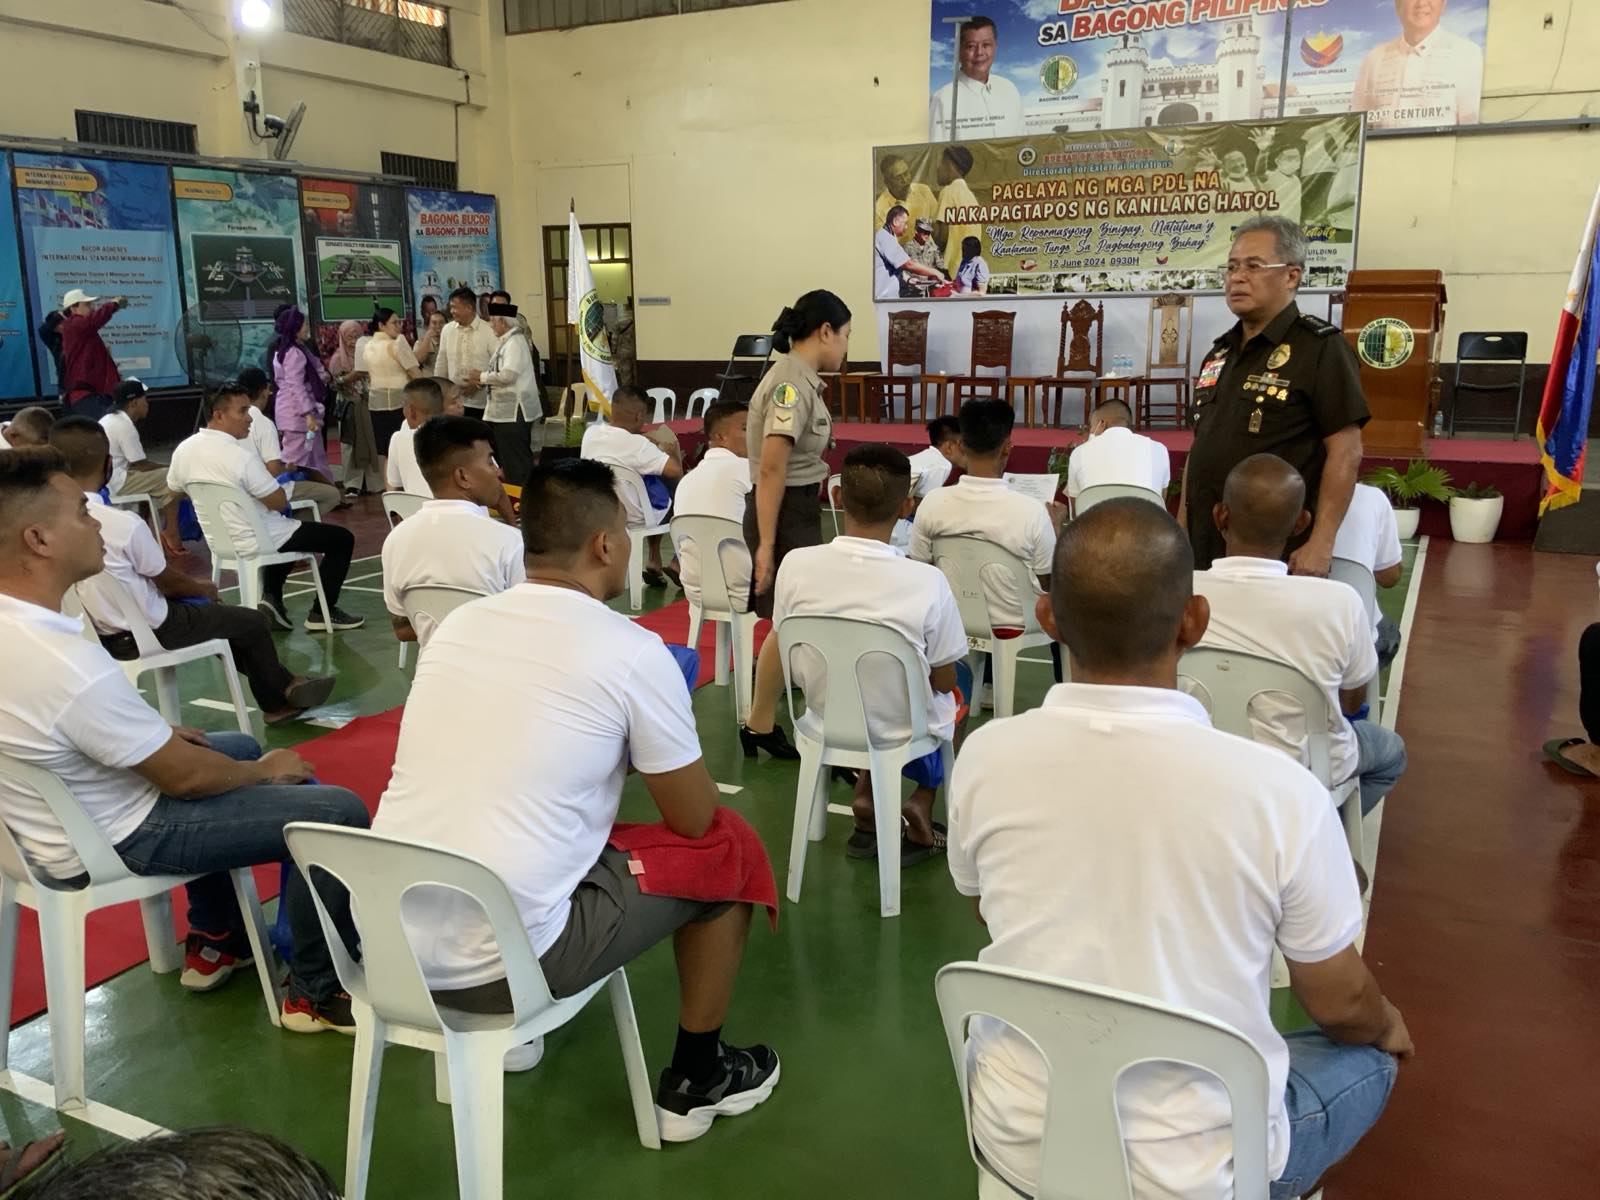 A total of 126 inmates from various penal institutions have been released as part of the country's Independence Day Celebration.